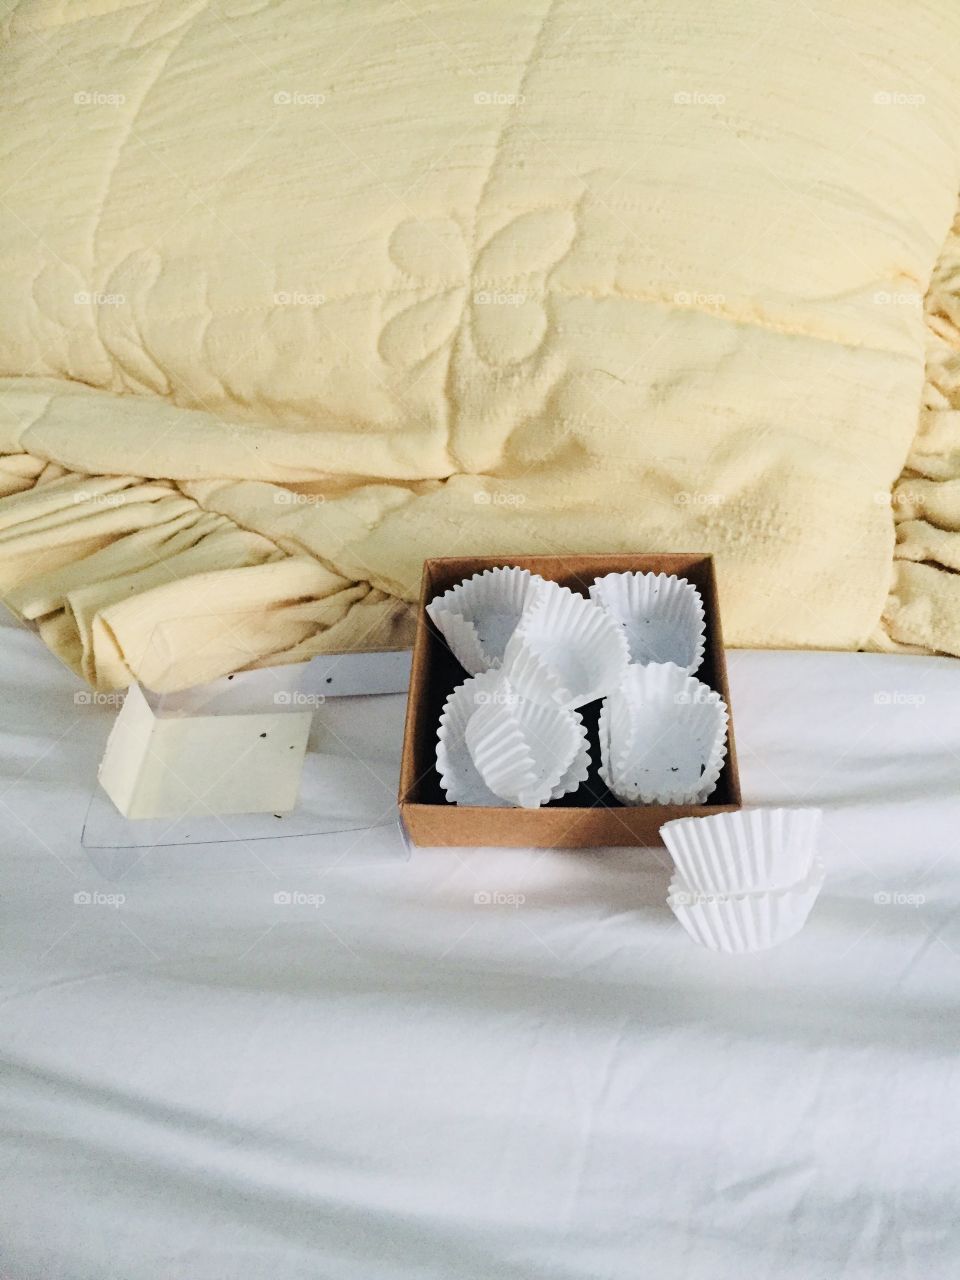 An empty box of chocolates with the wrappers scattered on a bedspread. There’s a yellow pillow in the background.